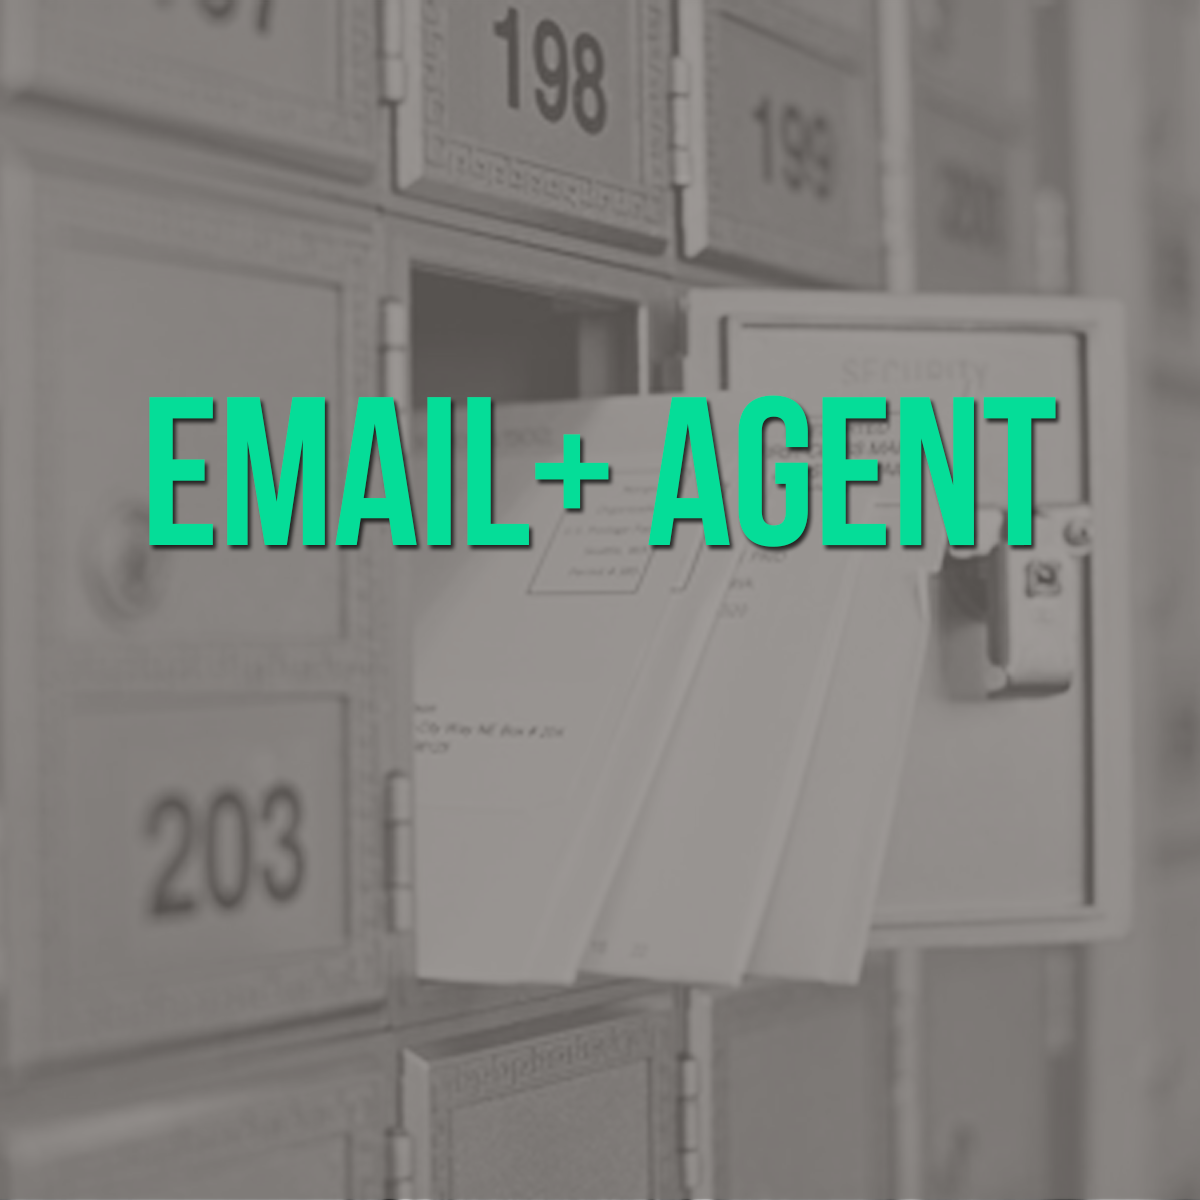 Email+ Agent.png